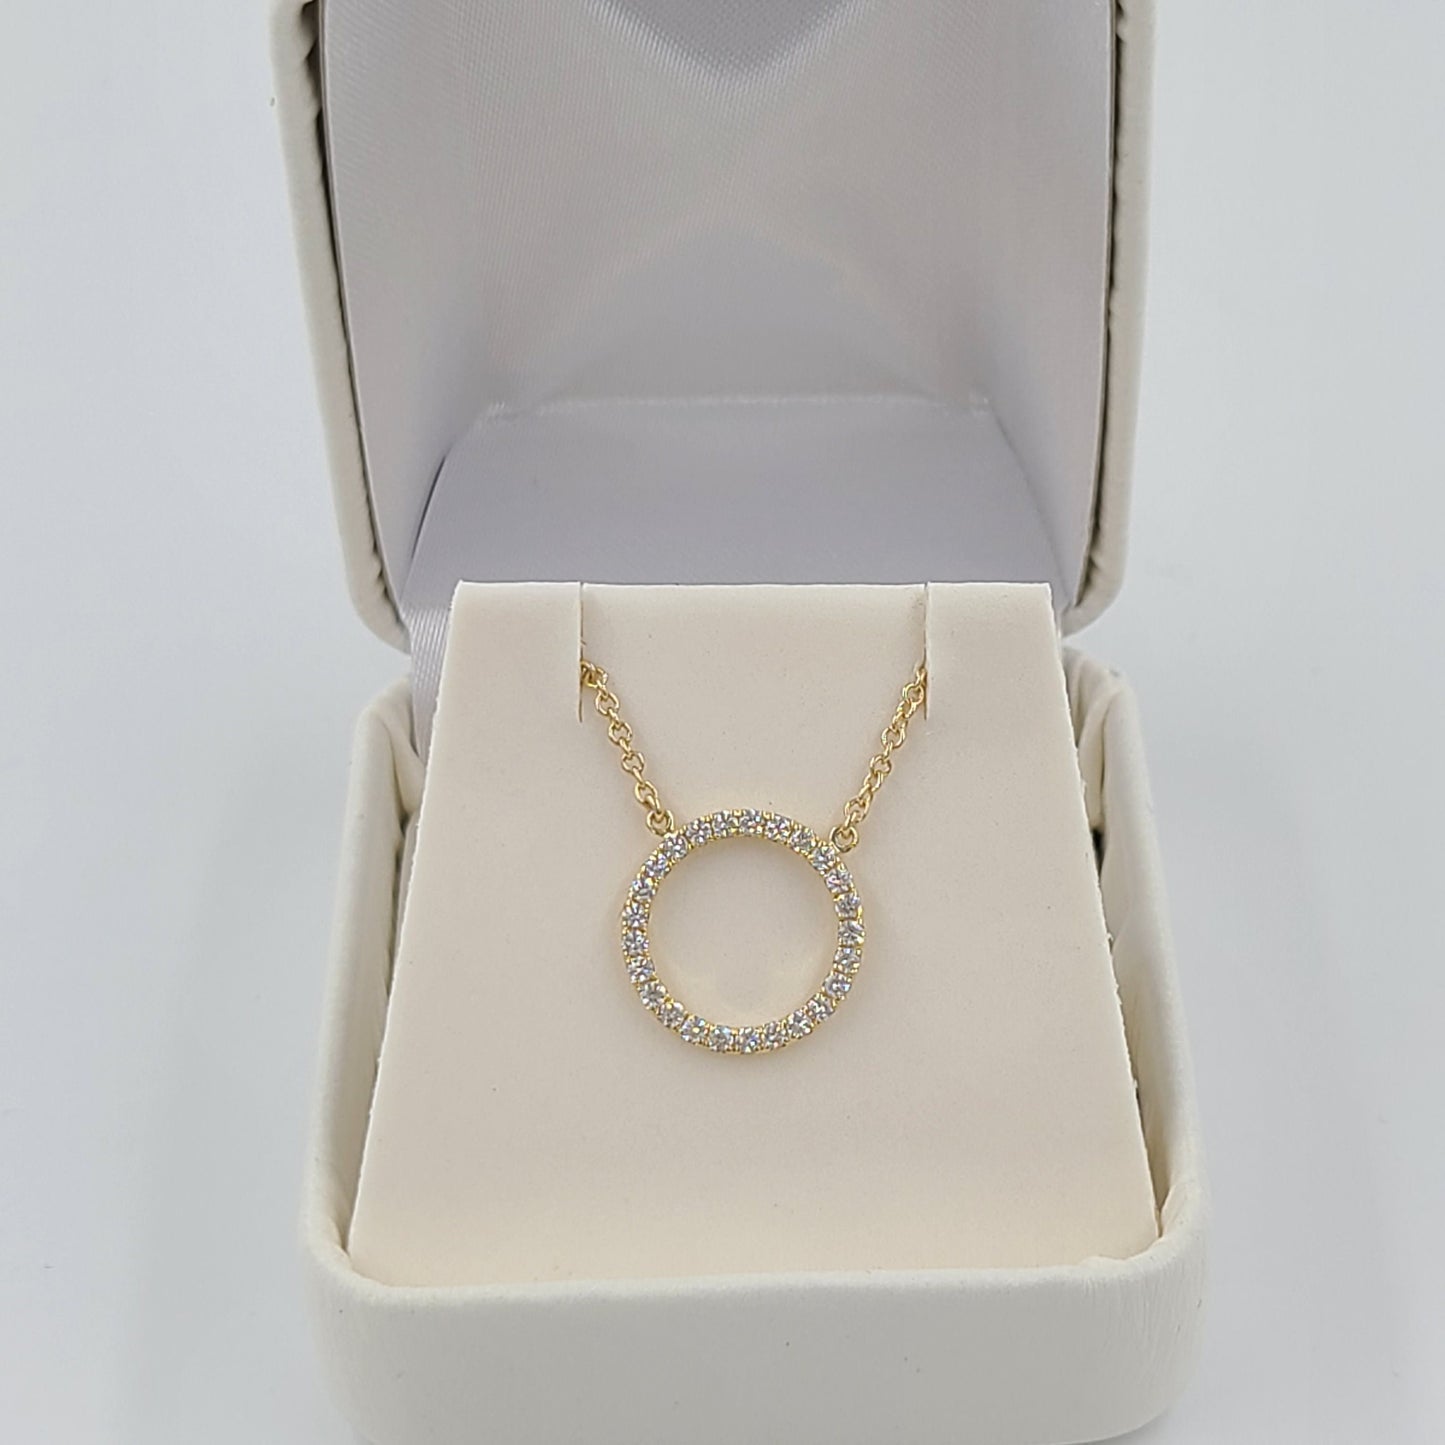 13mm Open Circle Diamond Necklace / Circle Pendant / 14k Gold Necklace/ Natural White Diamond / Simple Dainty Necklace / Gift for Her